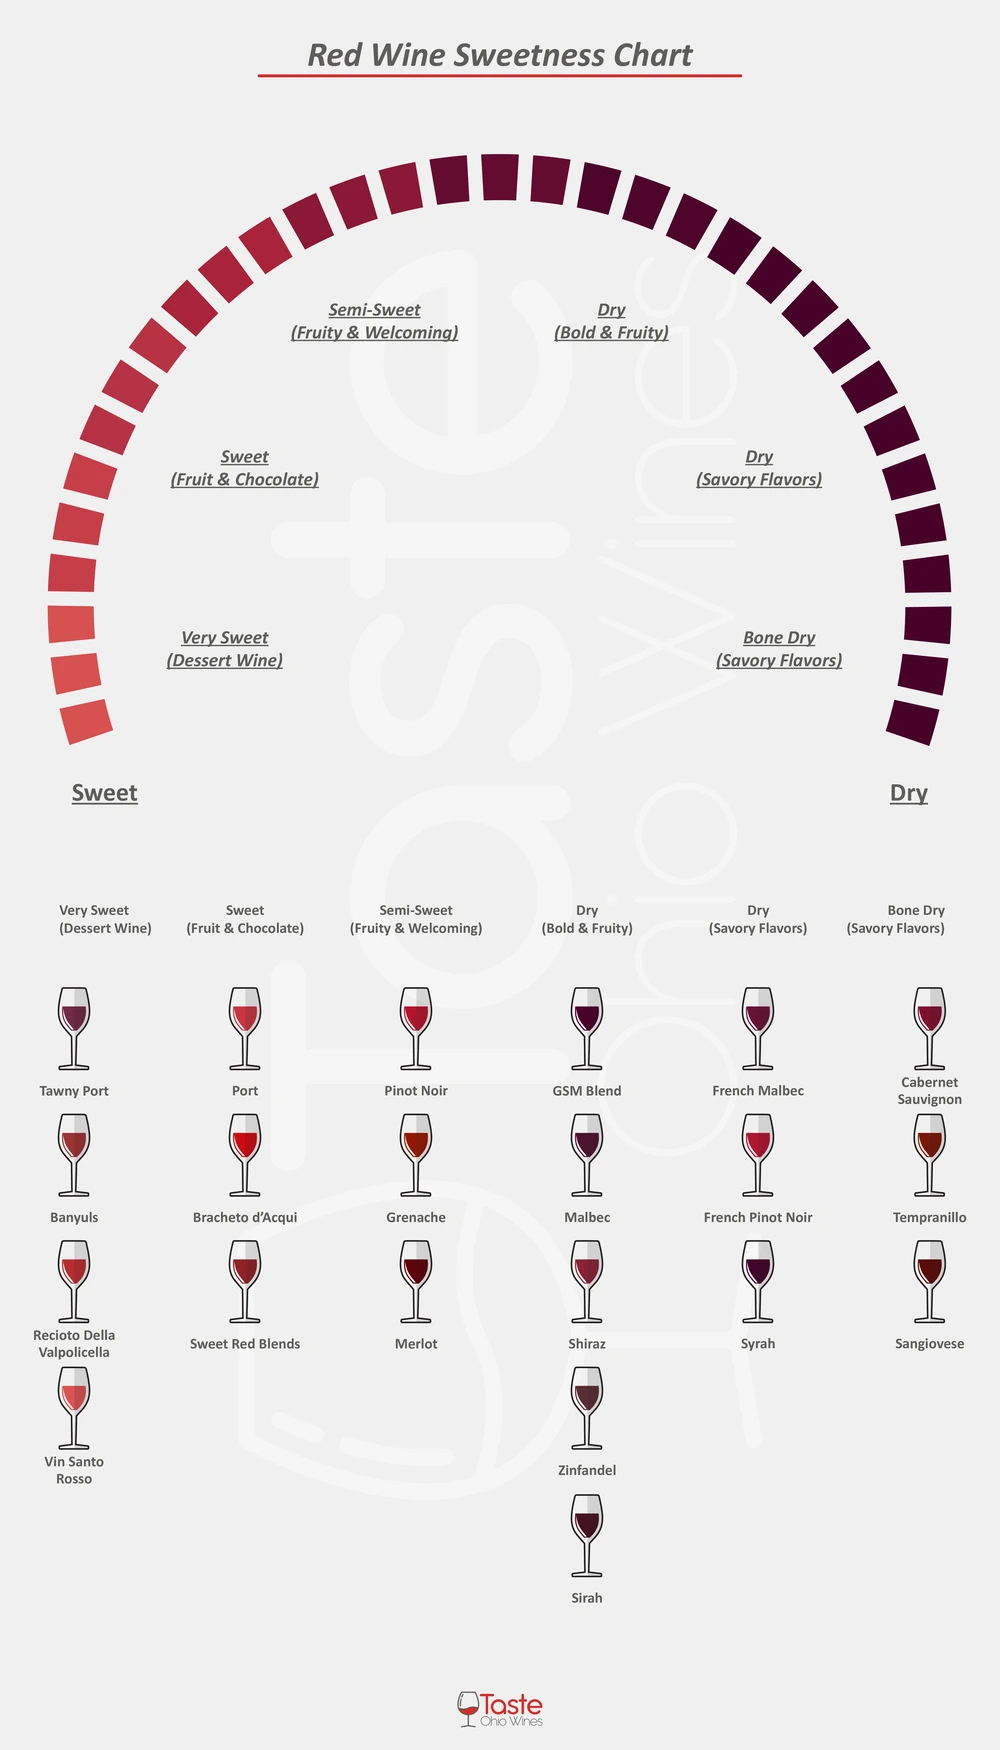 Red Wine Sweetness Chart Infographic